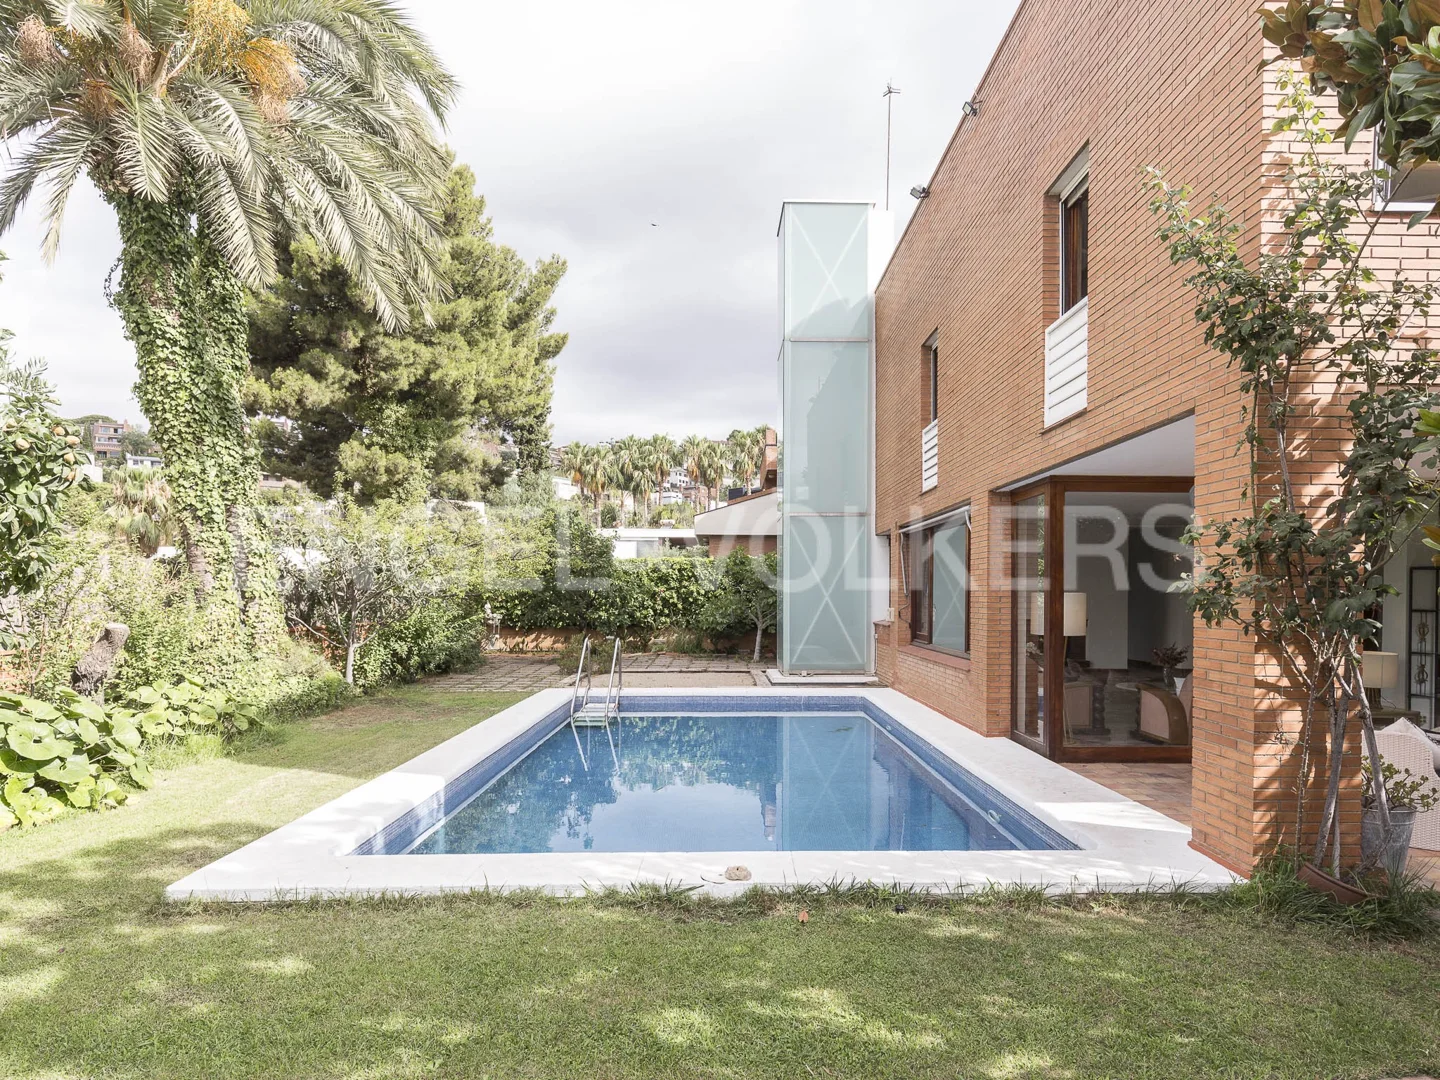 Exclusive house with pool in Ciudad Diagonal